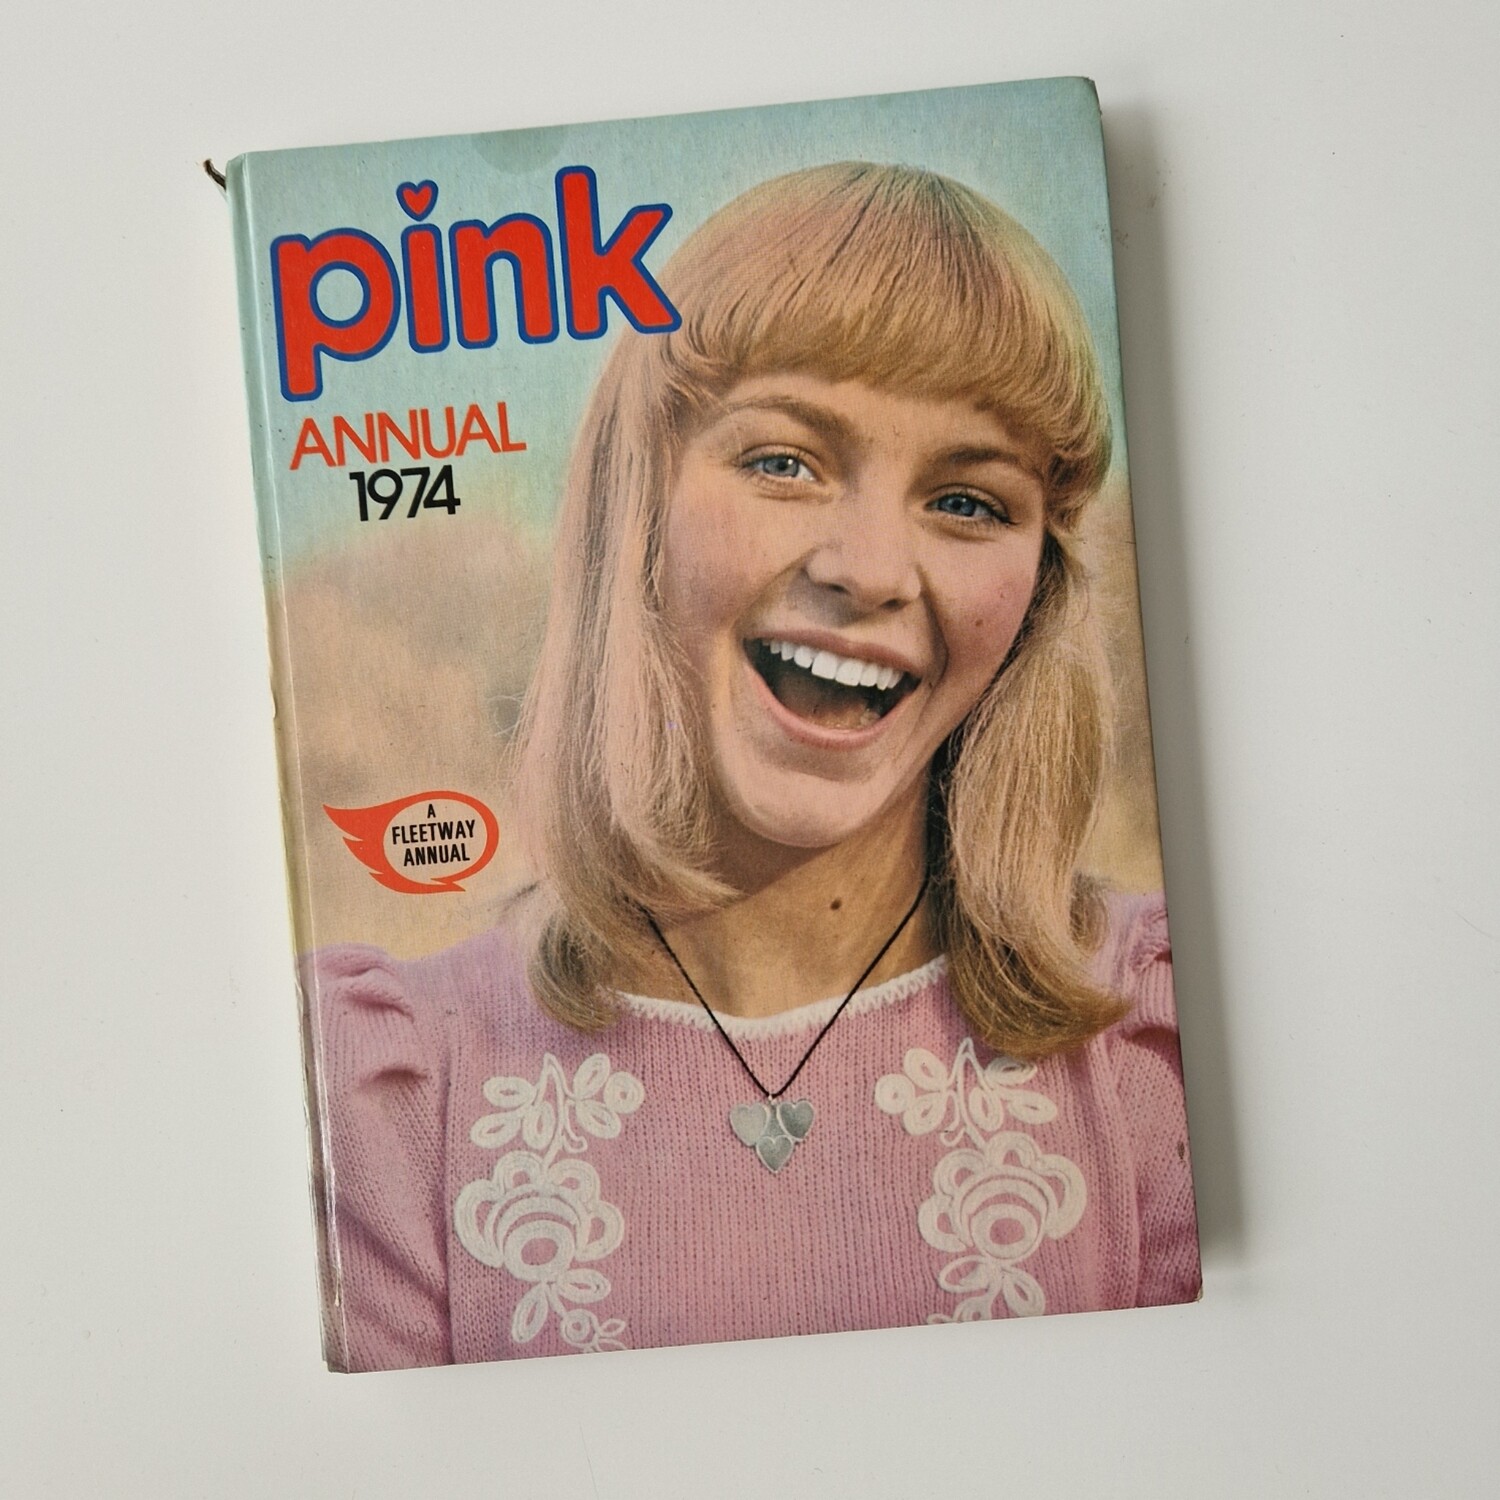 Pink Annual 1974